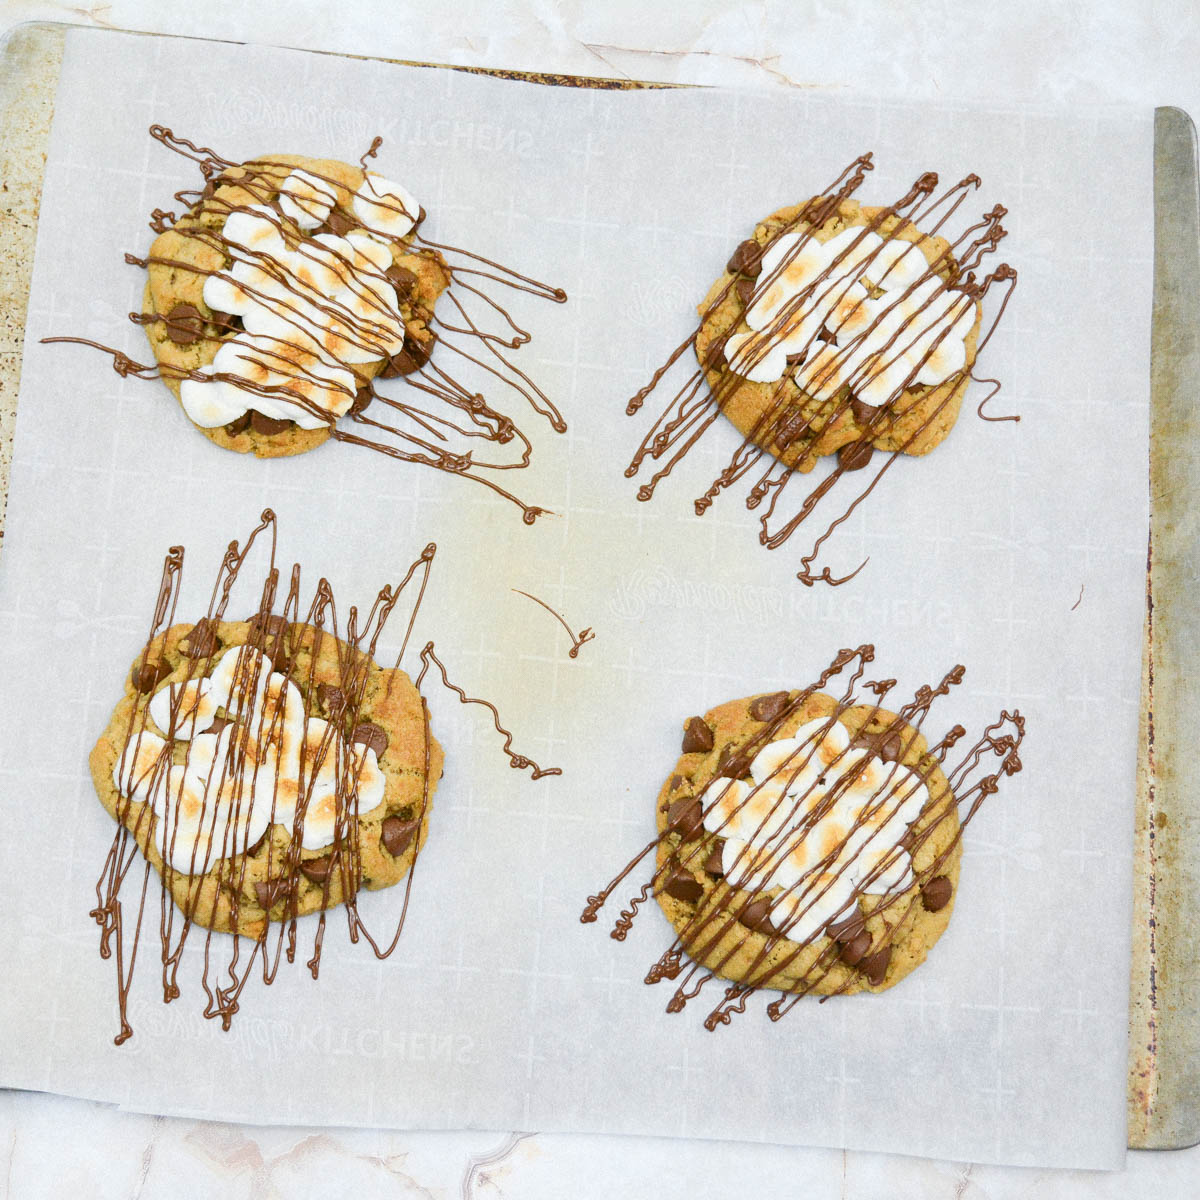 S'mores cookies drizzled with chocolate